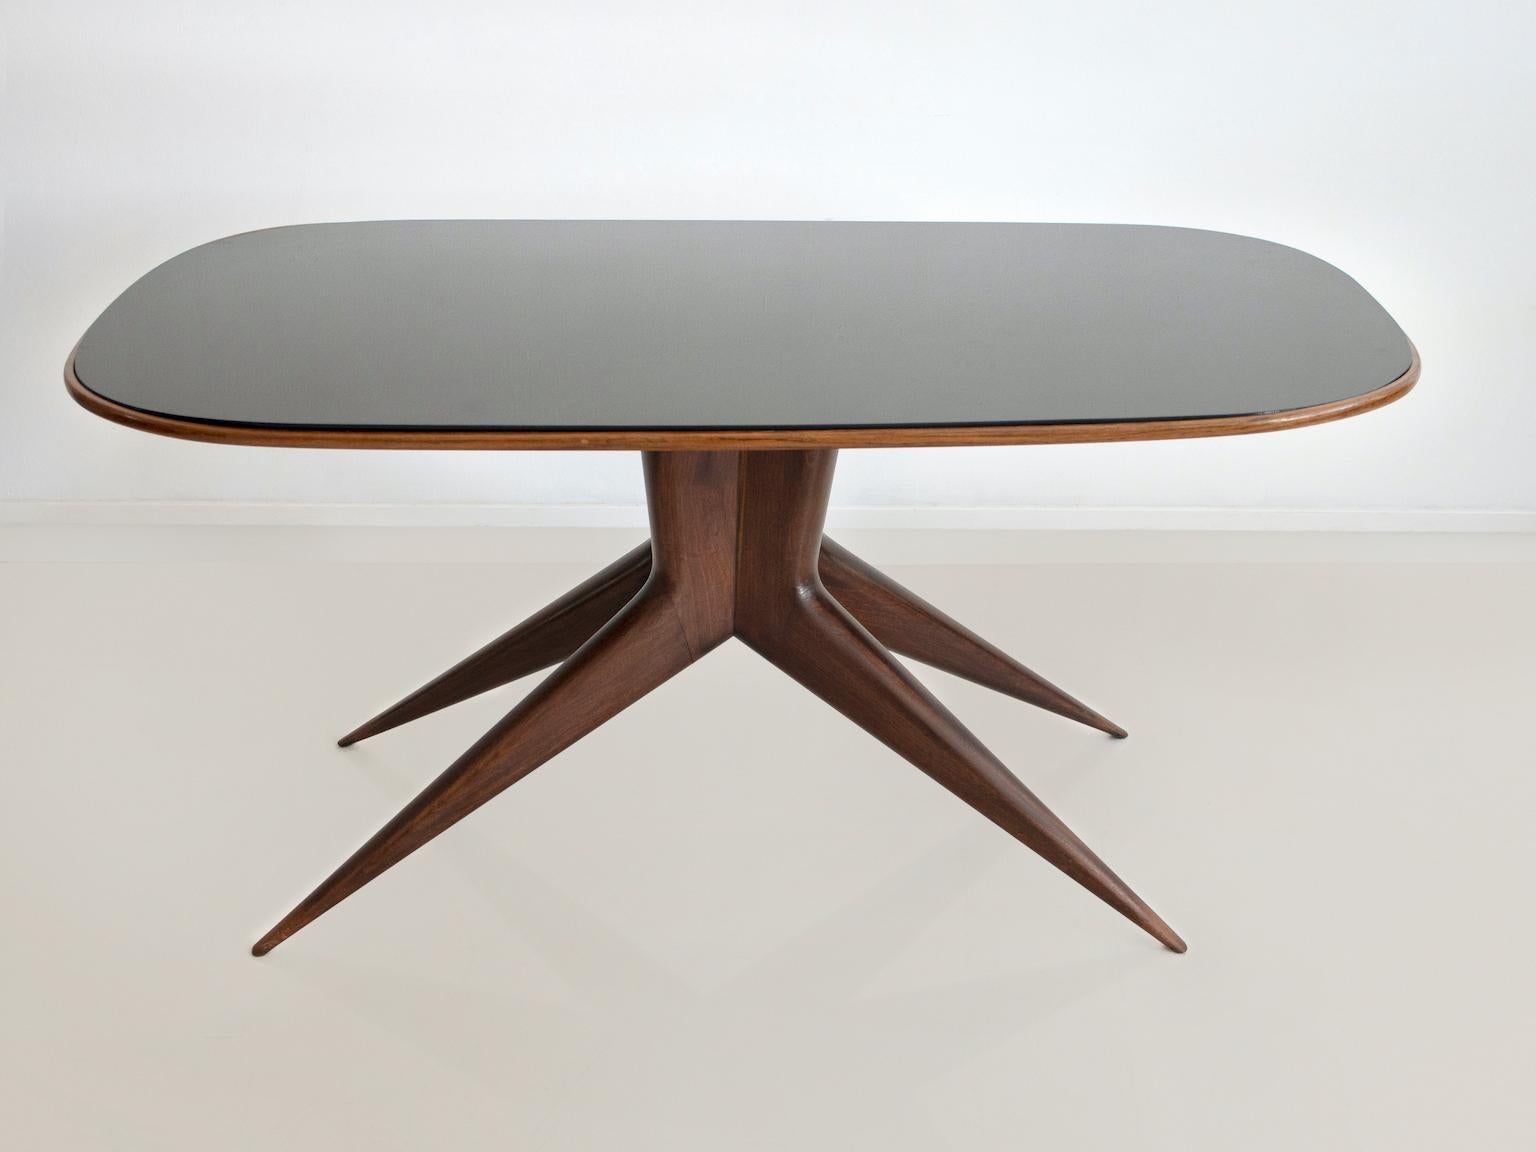 Italian Dining Table with Wooden Structure and Tinted Glass Top